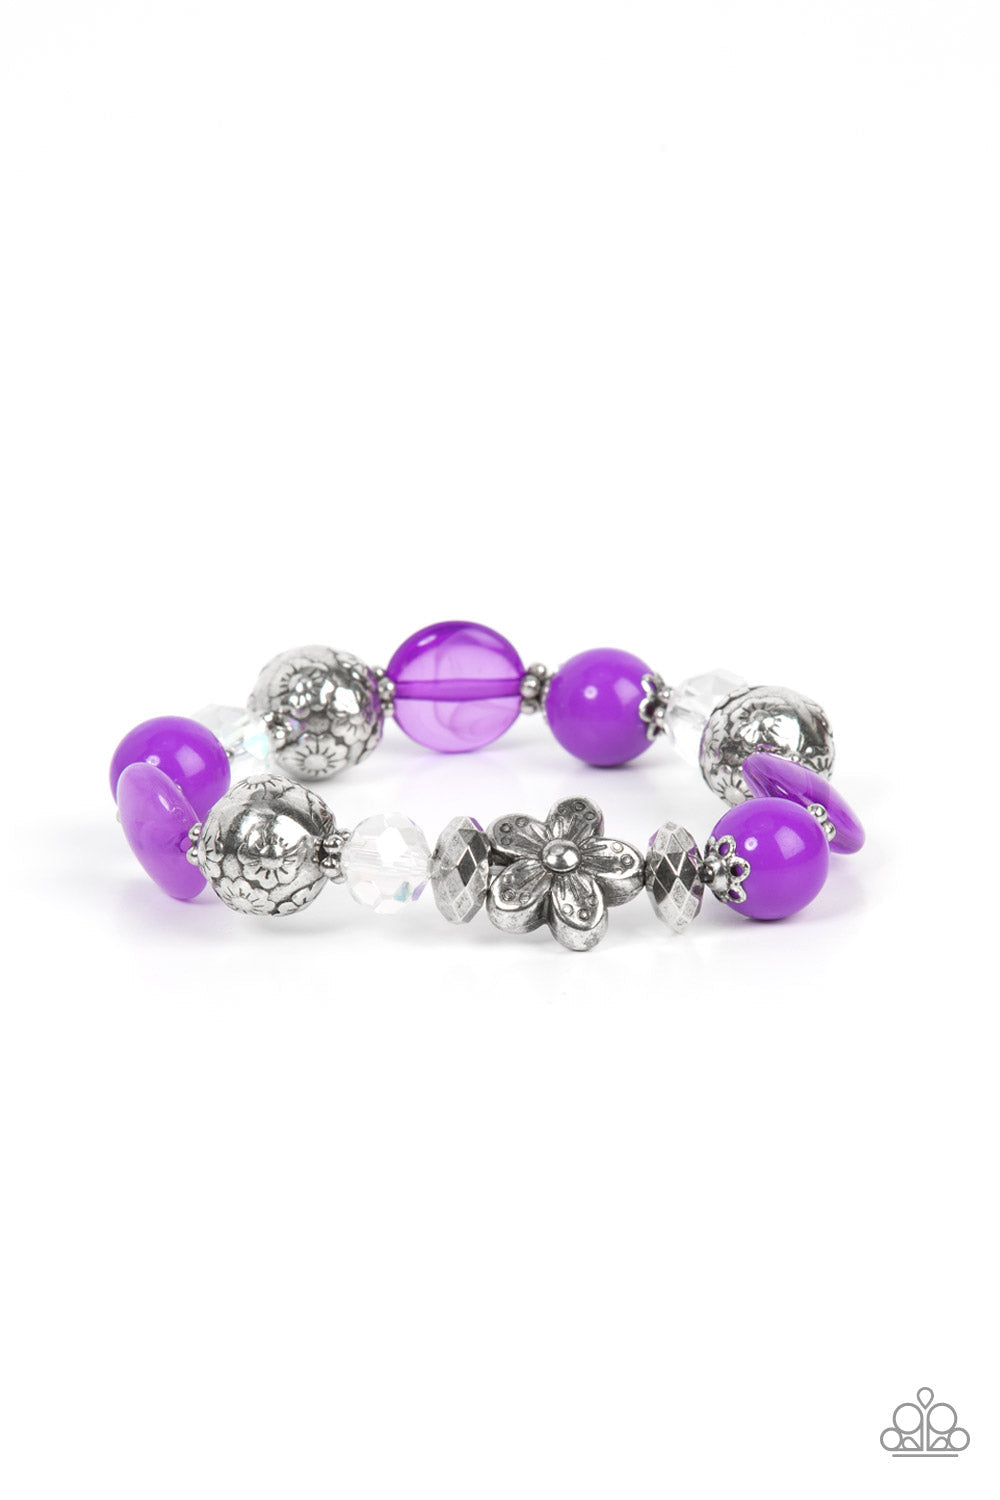 Pretty Persuasion - Purple - Silver - Iridescent Bead - Stretchy Bracelet - assortment of silver floral beads and studded silver rings join an opaque, glassy, and iridescent assortment of purple and white beads along a stretchy band around the wrist for a whimsical pop of color. Sold as one individual bracelet. Bejeweled Accessories By Kristie - Trendy fashion jewelry for everyone -